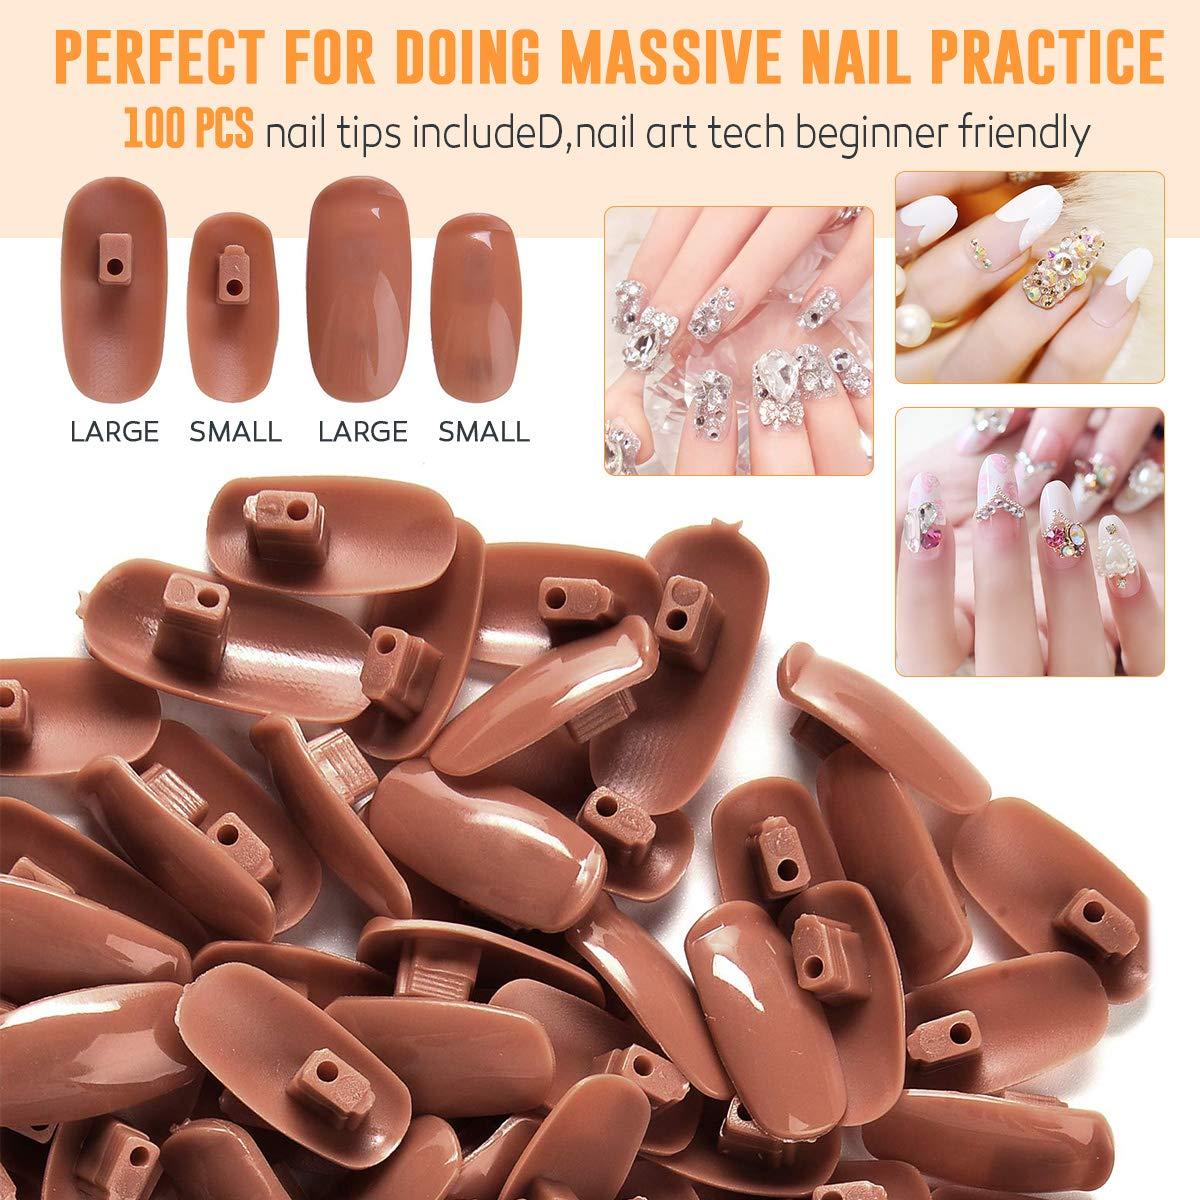 Practice Hand for Acrylic Nails, Professional Nail Practice Hand for Training, Adjustable False Fake Mannequin Hand with 100pcs Nail Tips, Upgrade DIY